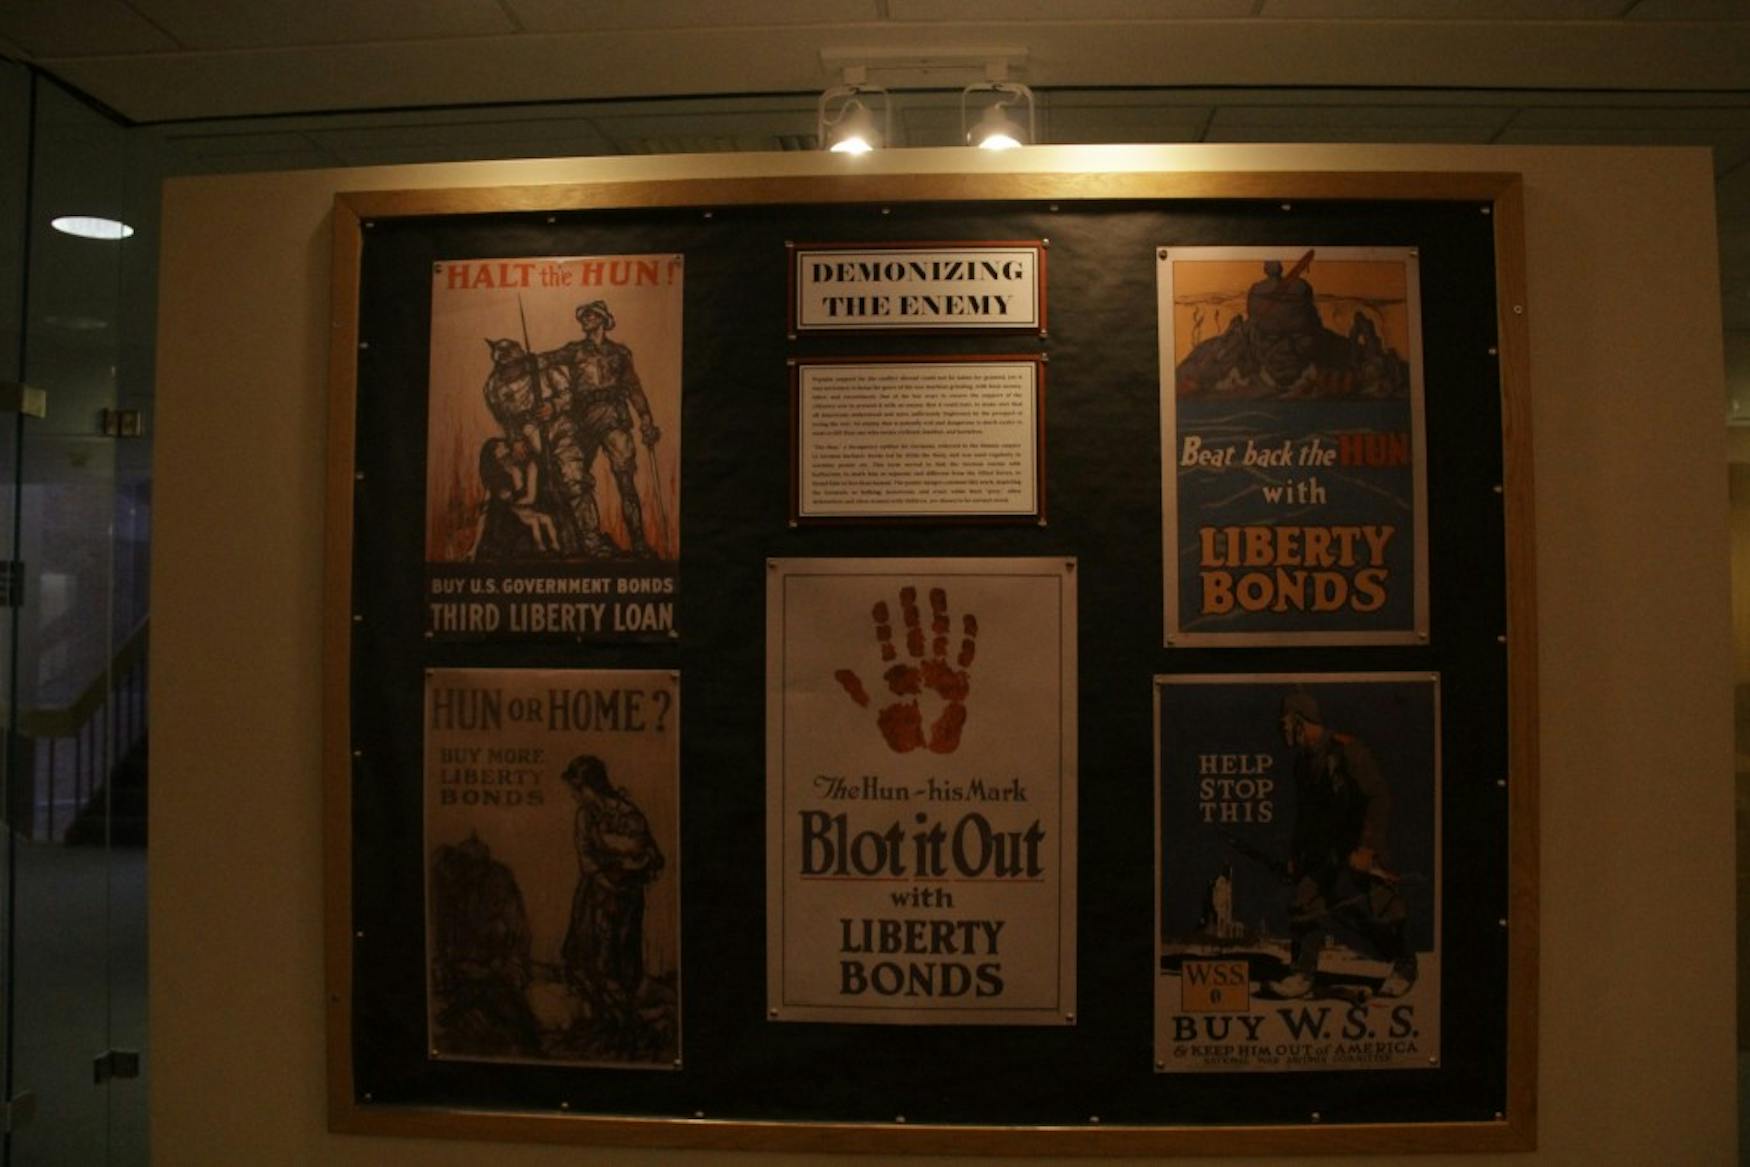 FOR LIBERTY: Some of the propaganda posters were used to evoke a hostile emotional response from American citizens toward the German enemy.